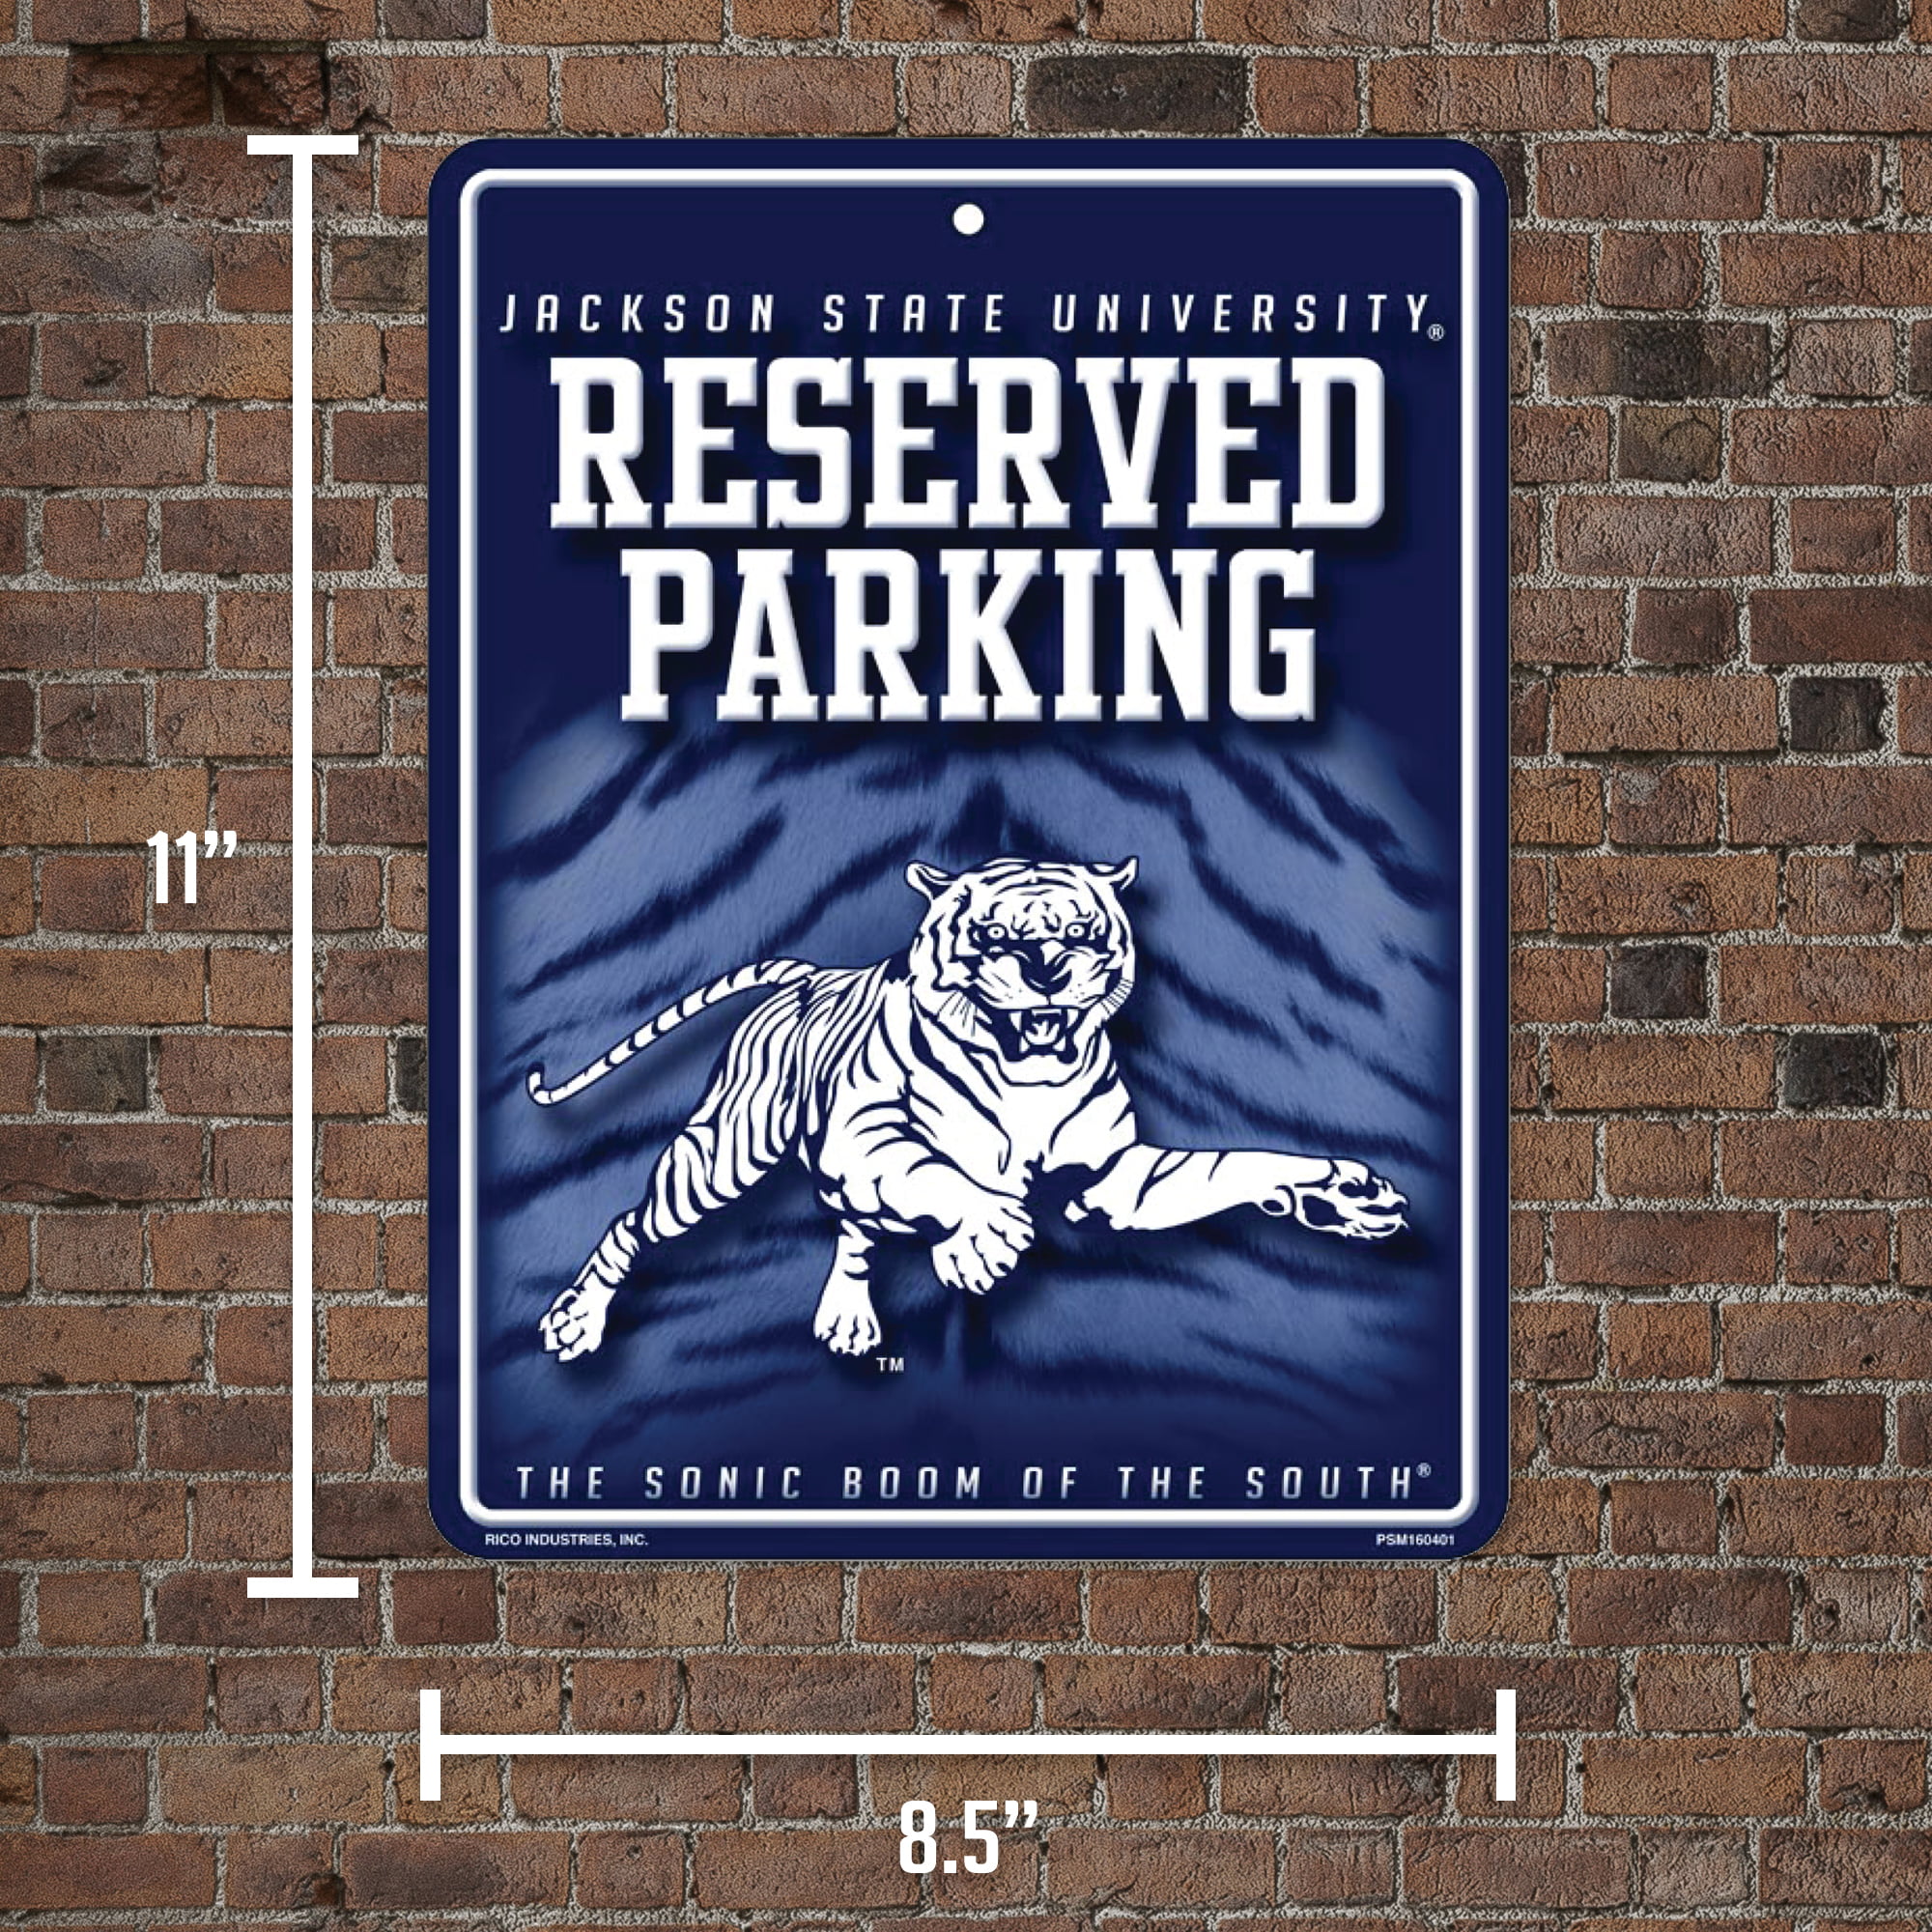 NFL Las Vegas Raiders 8.5 x 11 Metal Parking Sign - Great for Man Cave,  Bed Room, Office, Home Décor By Rico Industries